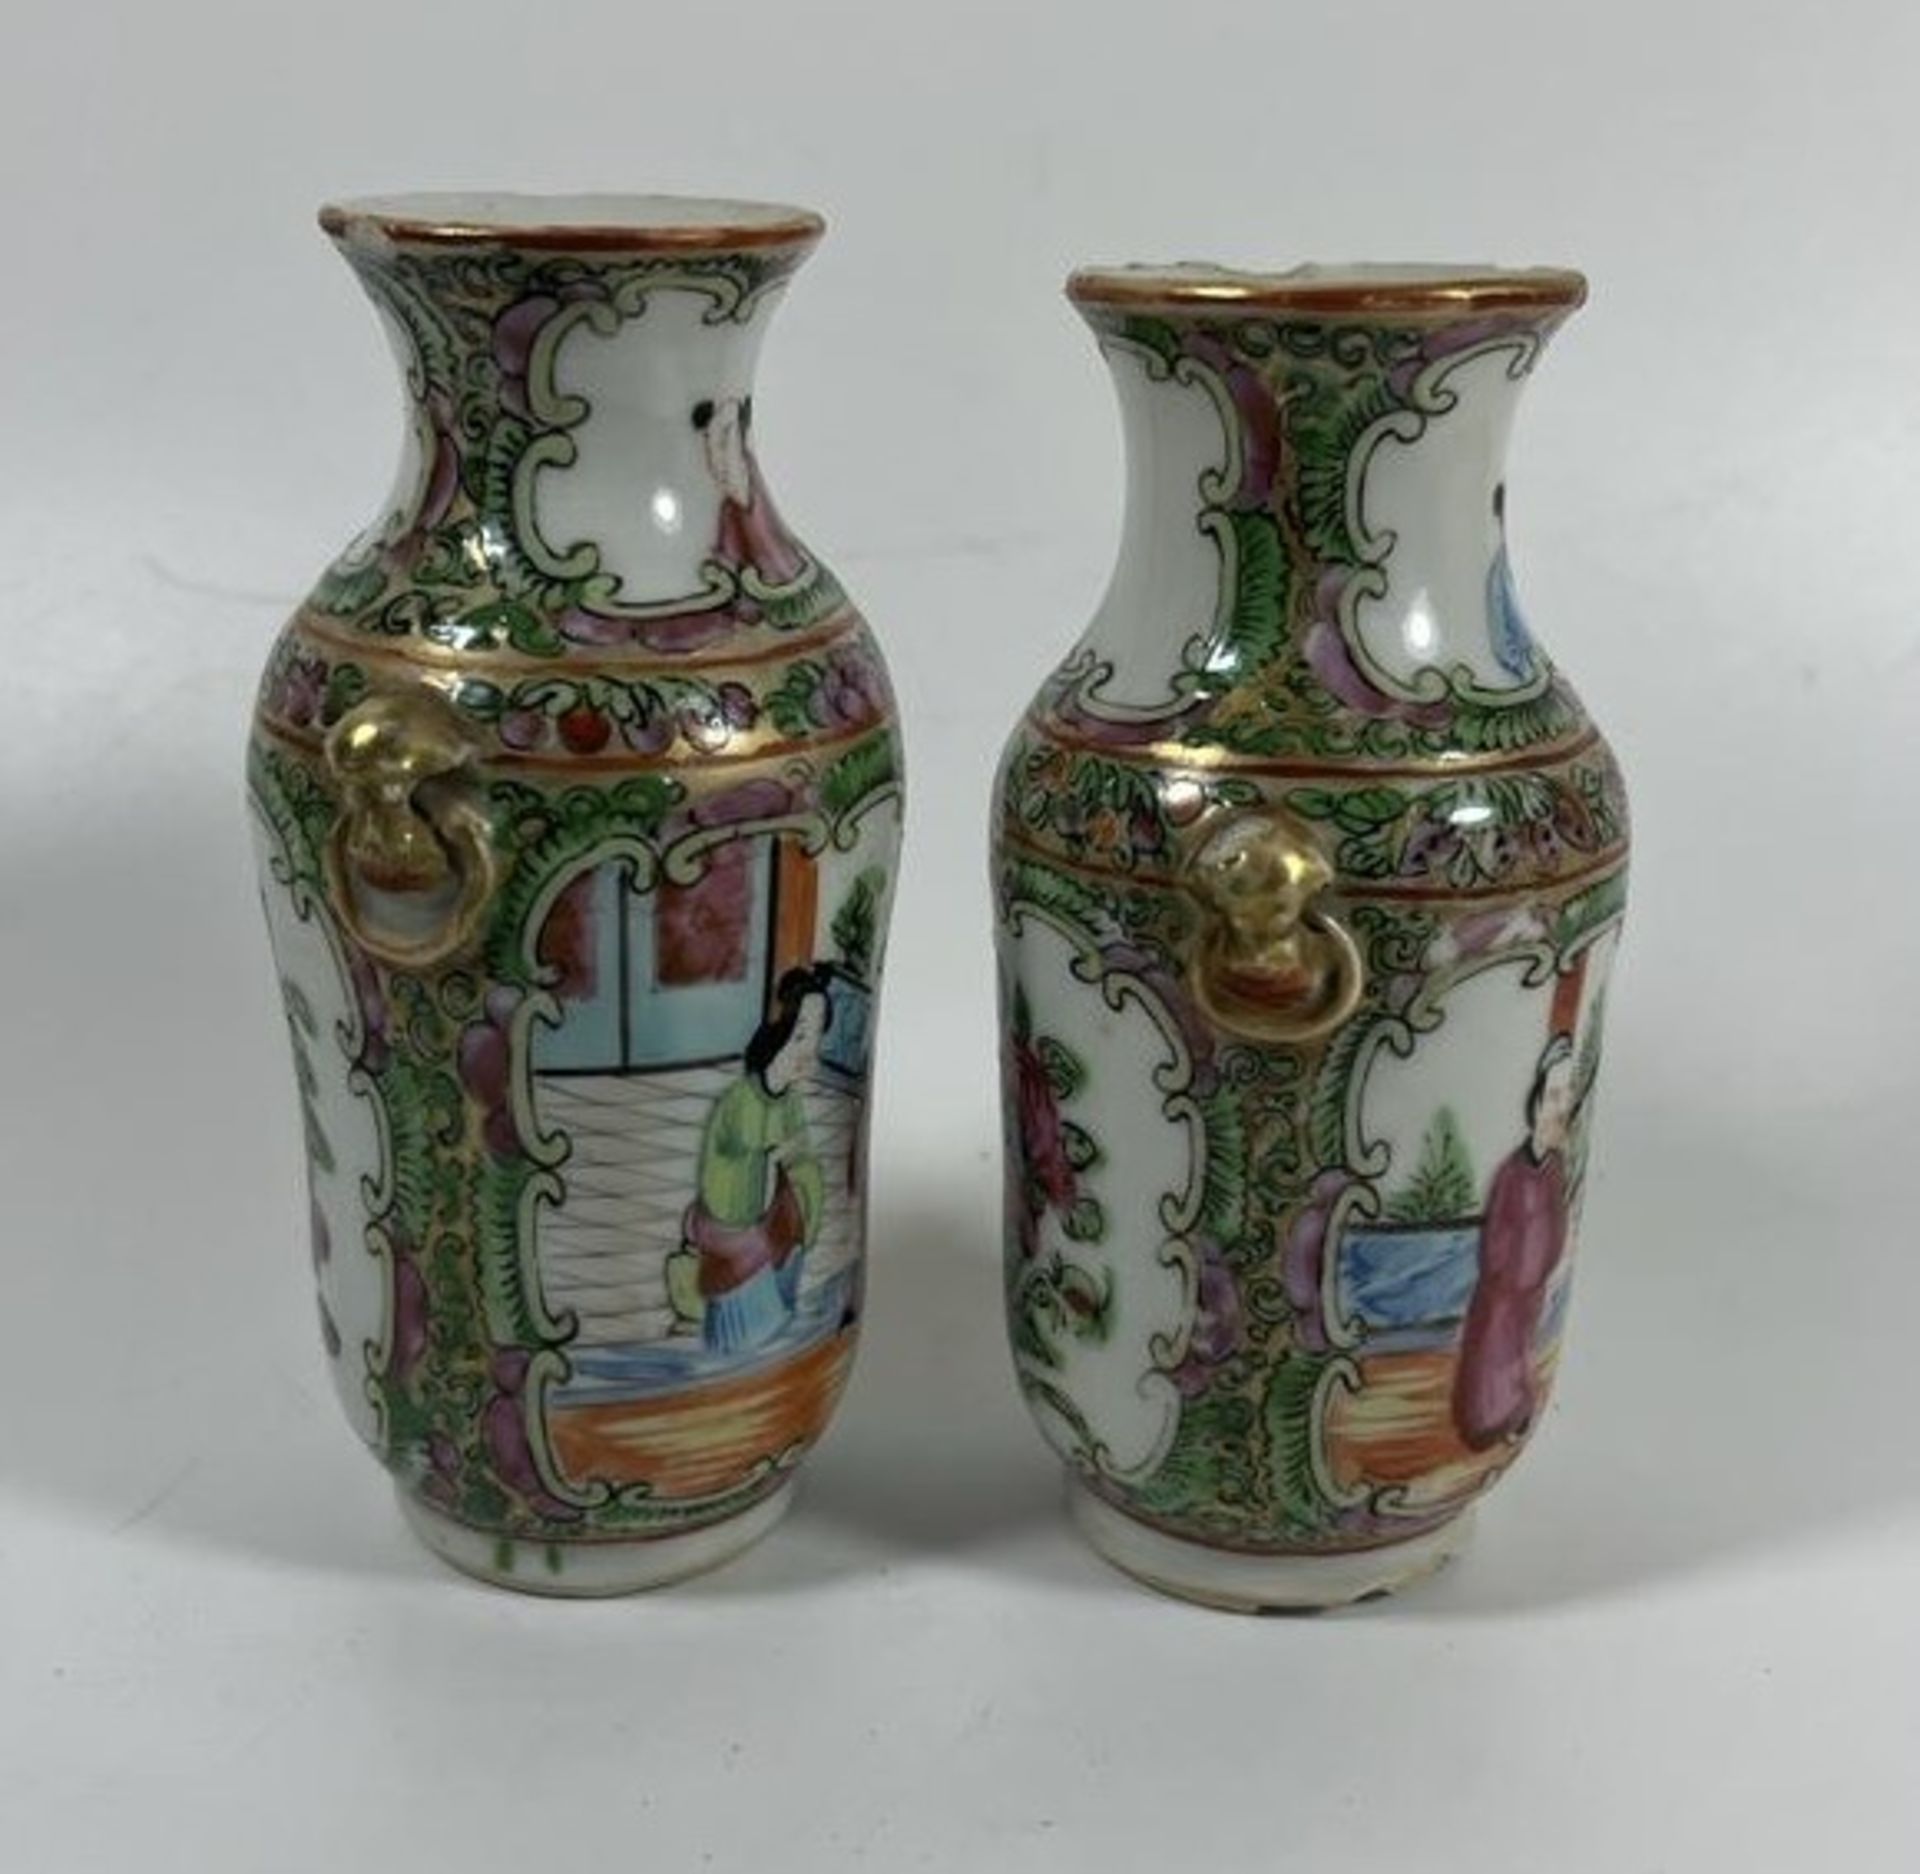 A PAIR OF 19TH CENTURY CHINESE CANTON FAMILLE ROSE MINIATURE VASES WITH FIGURAL DESIGN, HEIGHT 12. - Image 4 of 7